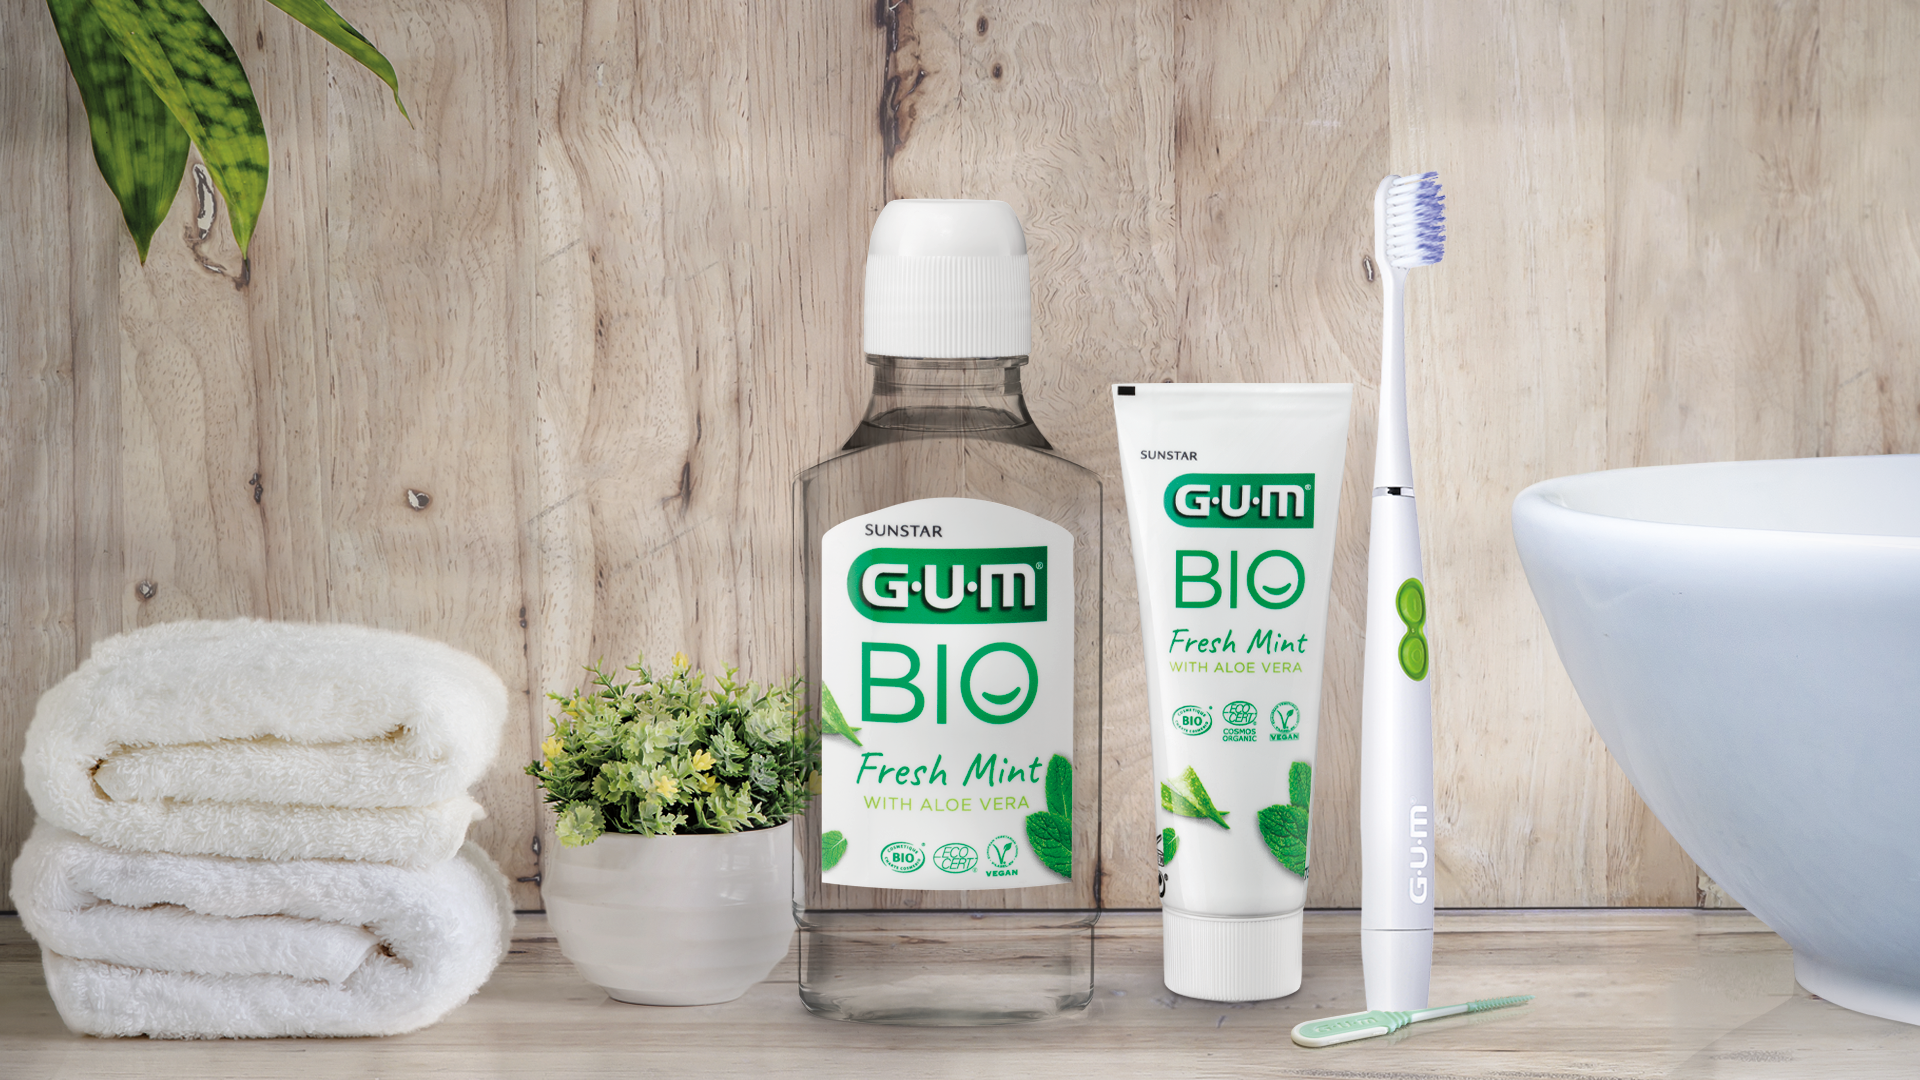 GUM BIO Mouthwash, GUM BIO Toothpaste and SONIC Daily Toothbrush into the bathroom for a daily care 